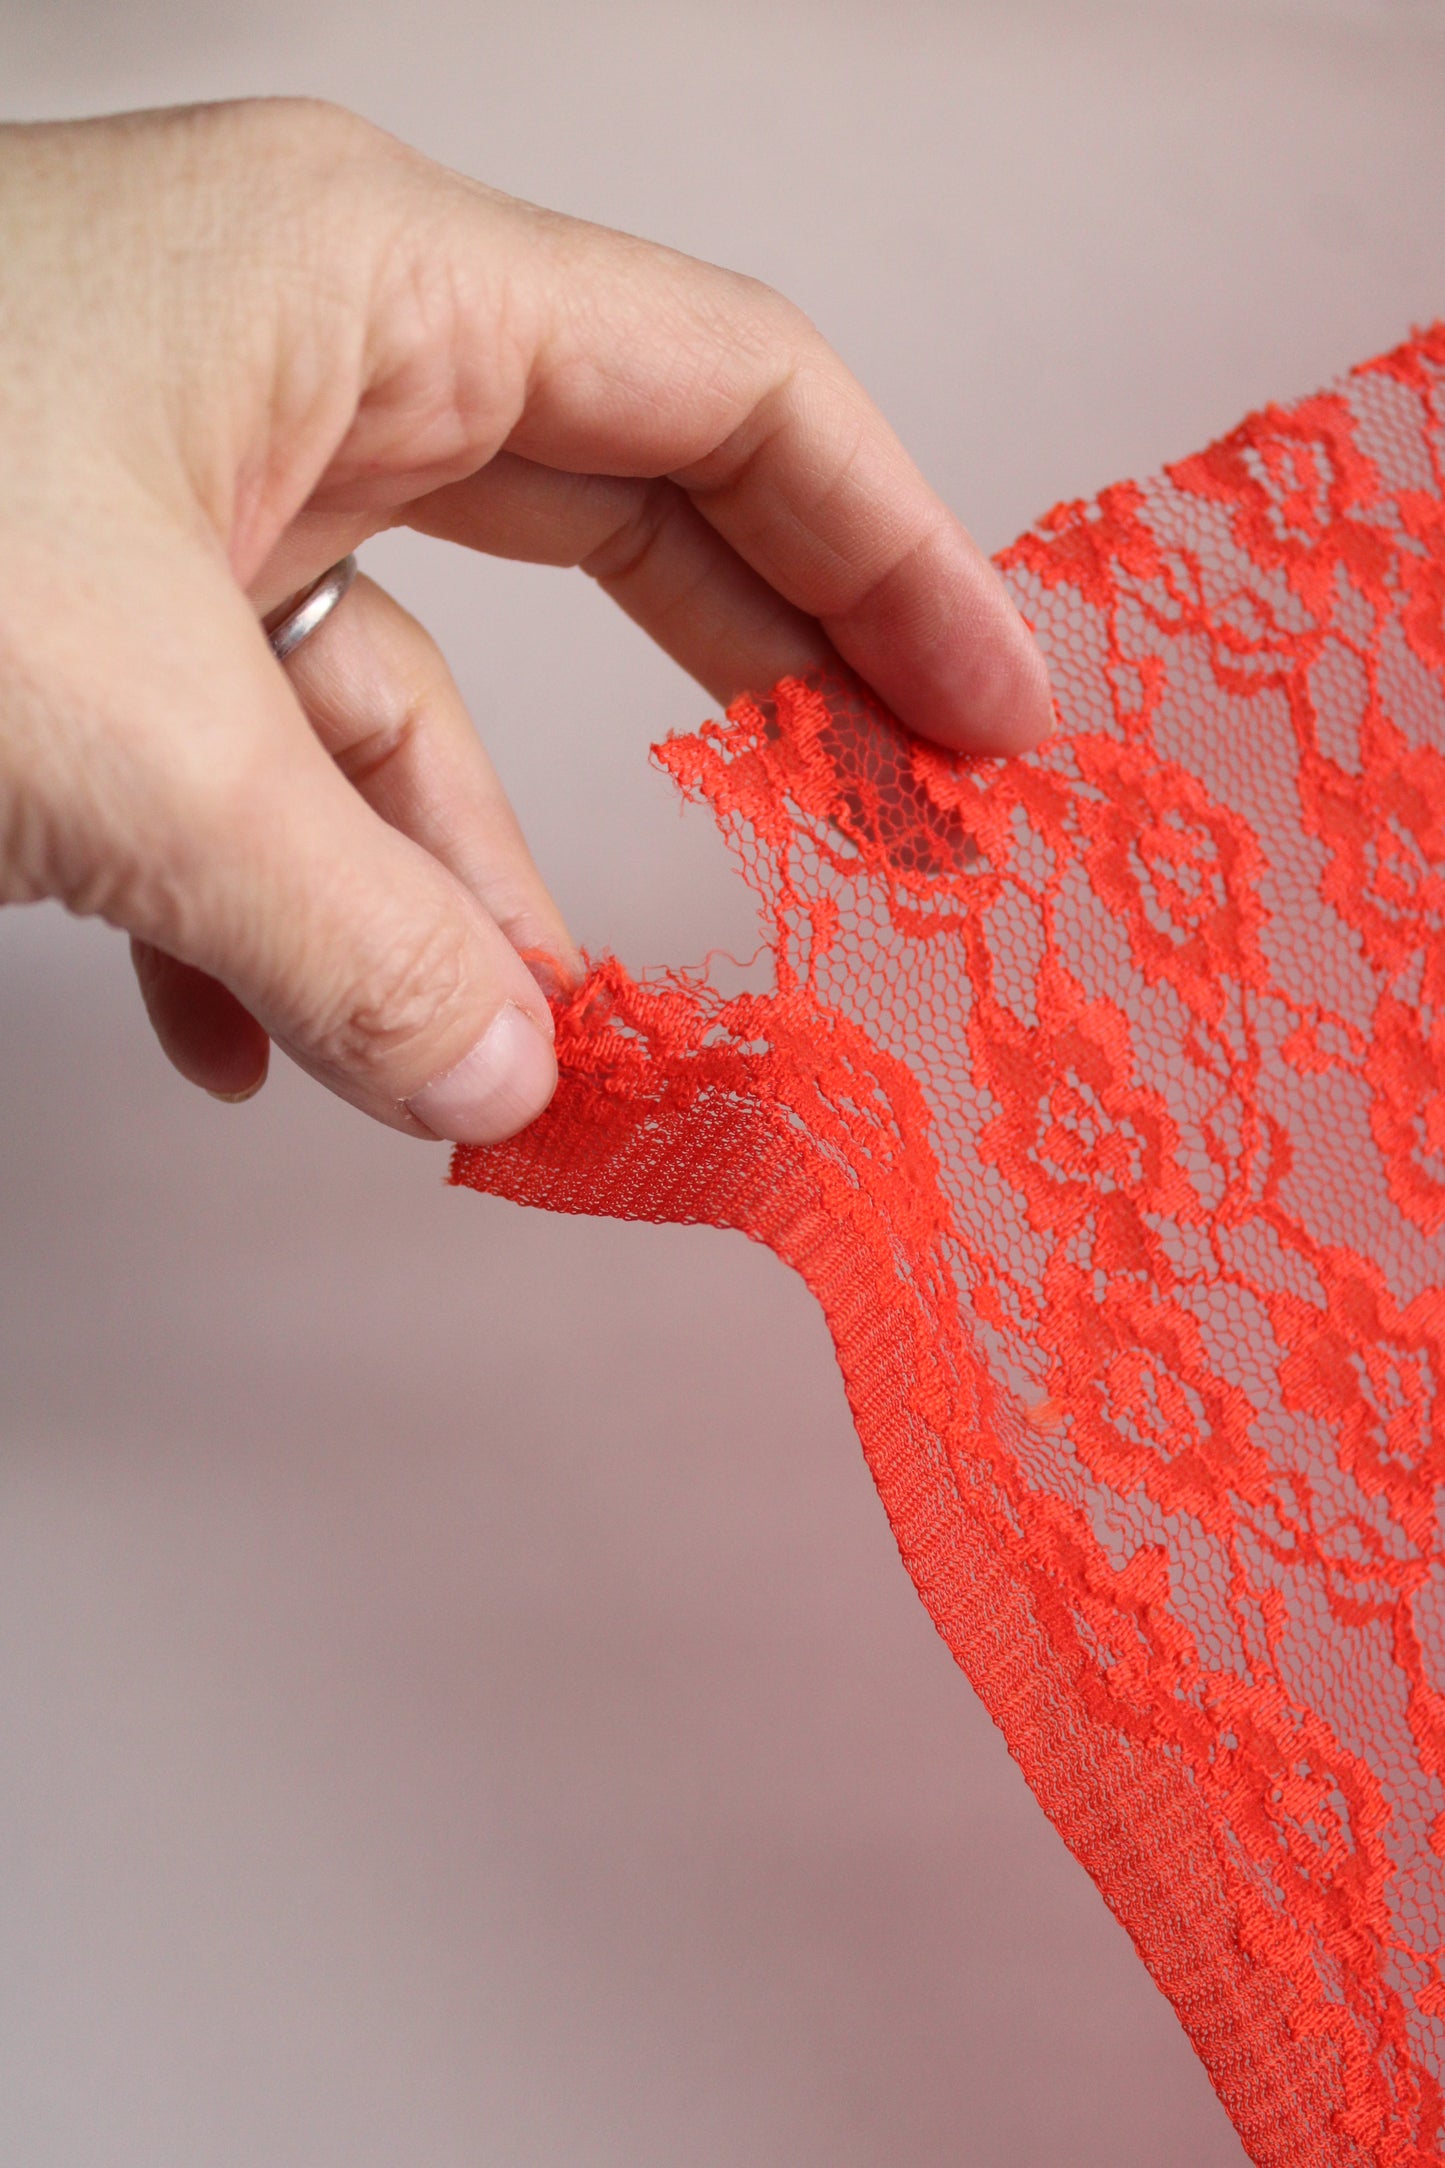 Vintage Red Lace Fabric Piece